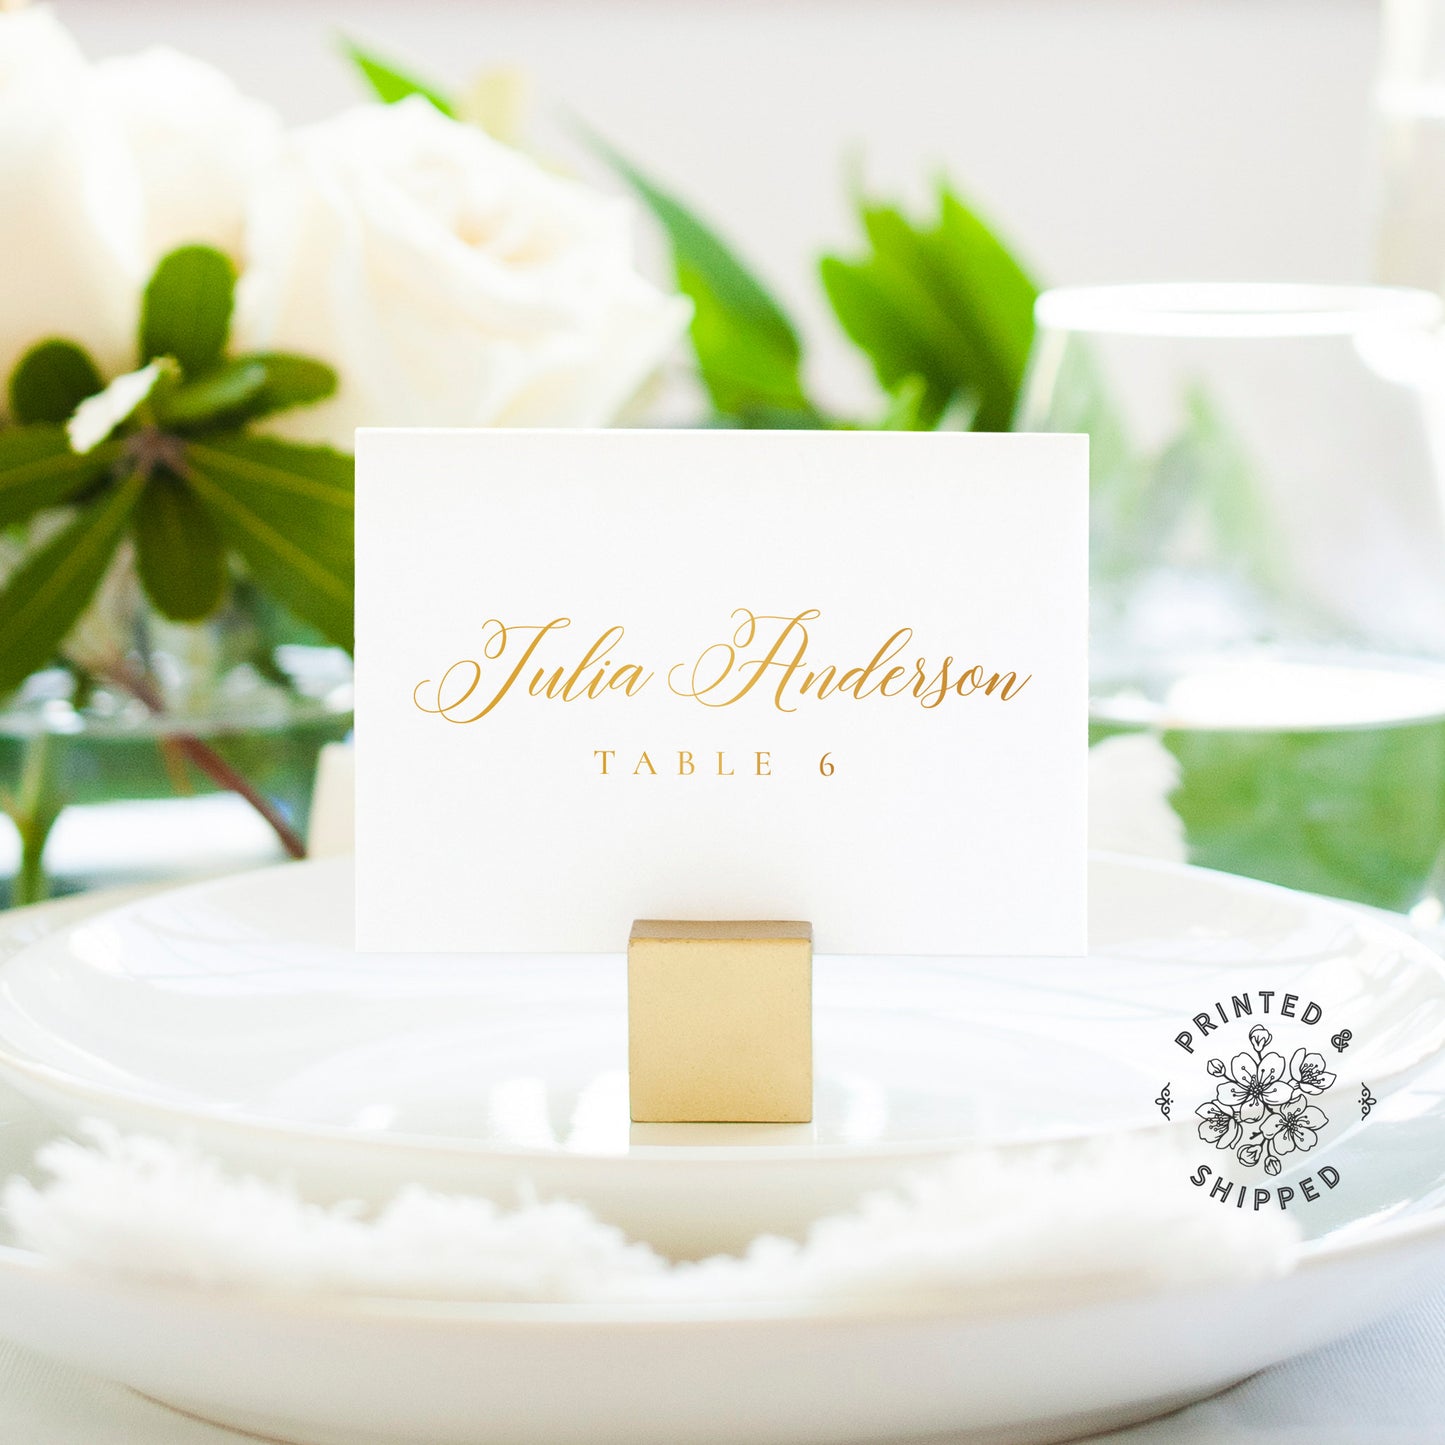 Lux Party’s gold place cards with white background and gold lettering, in a wedding table place setting.